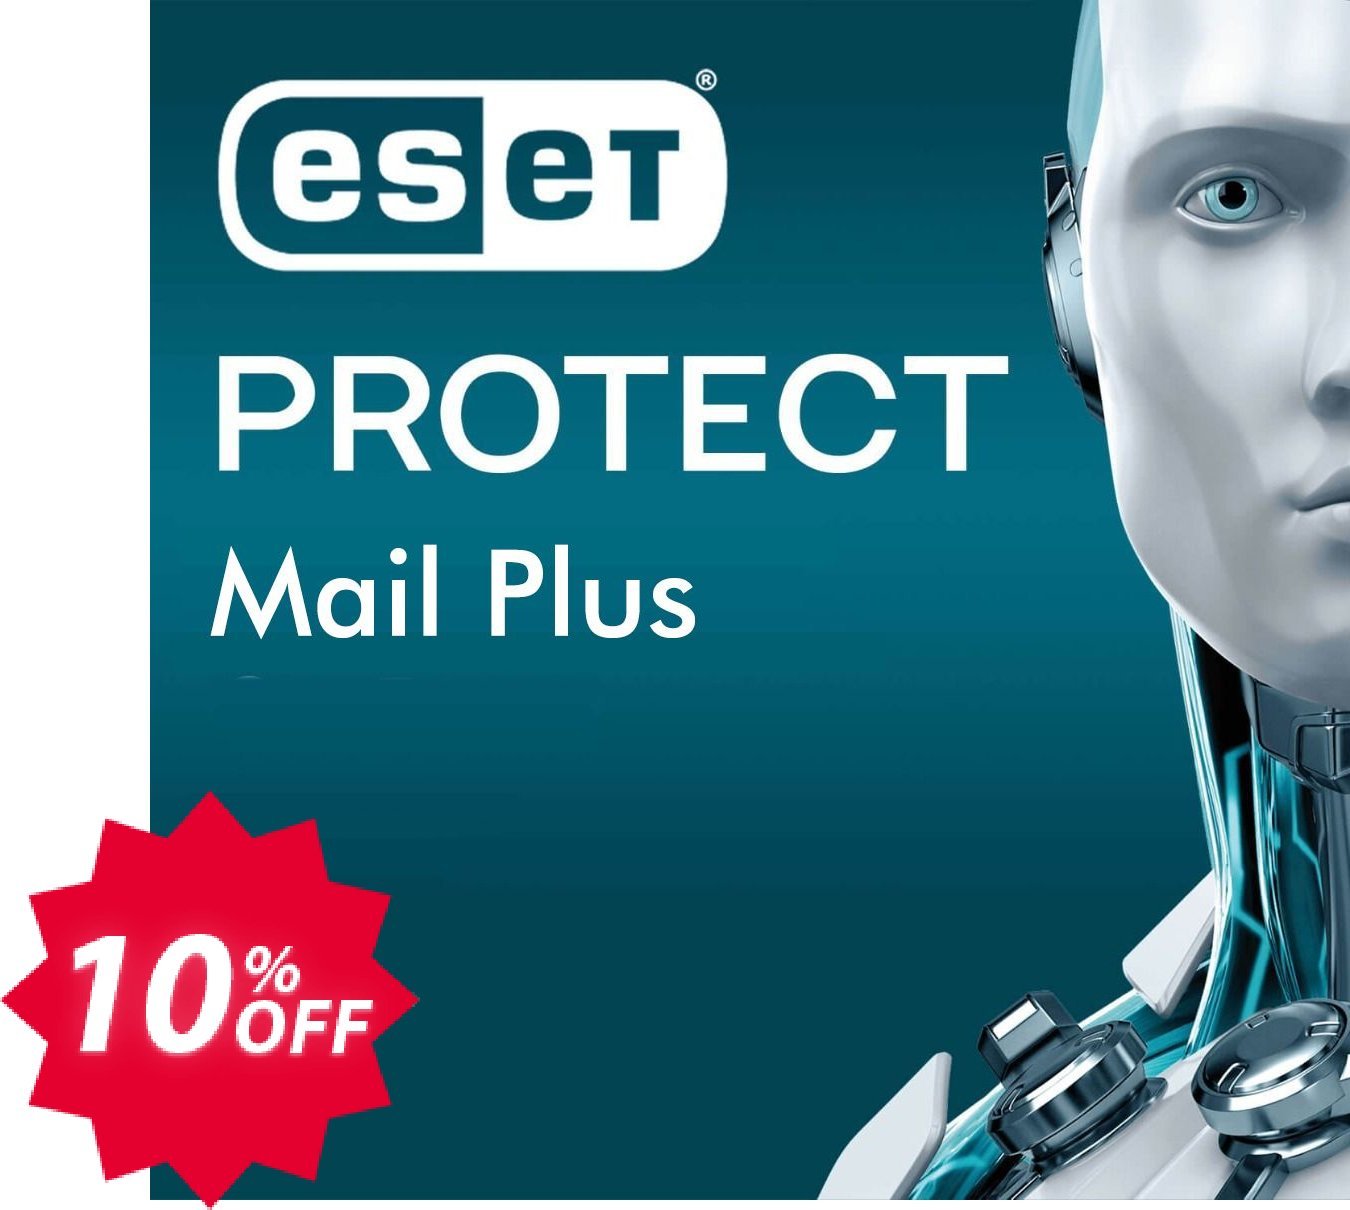 ESET PROTECT Mail Plus Coupon code 10% discount 